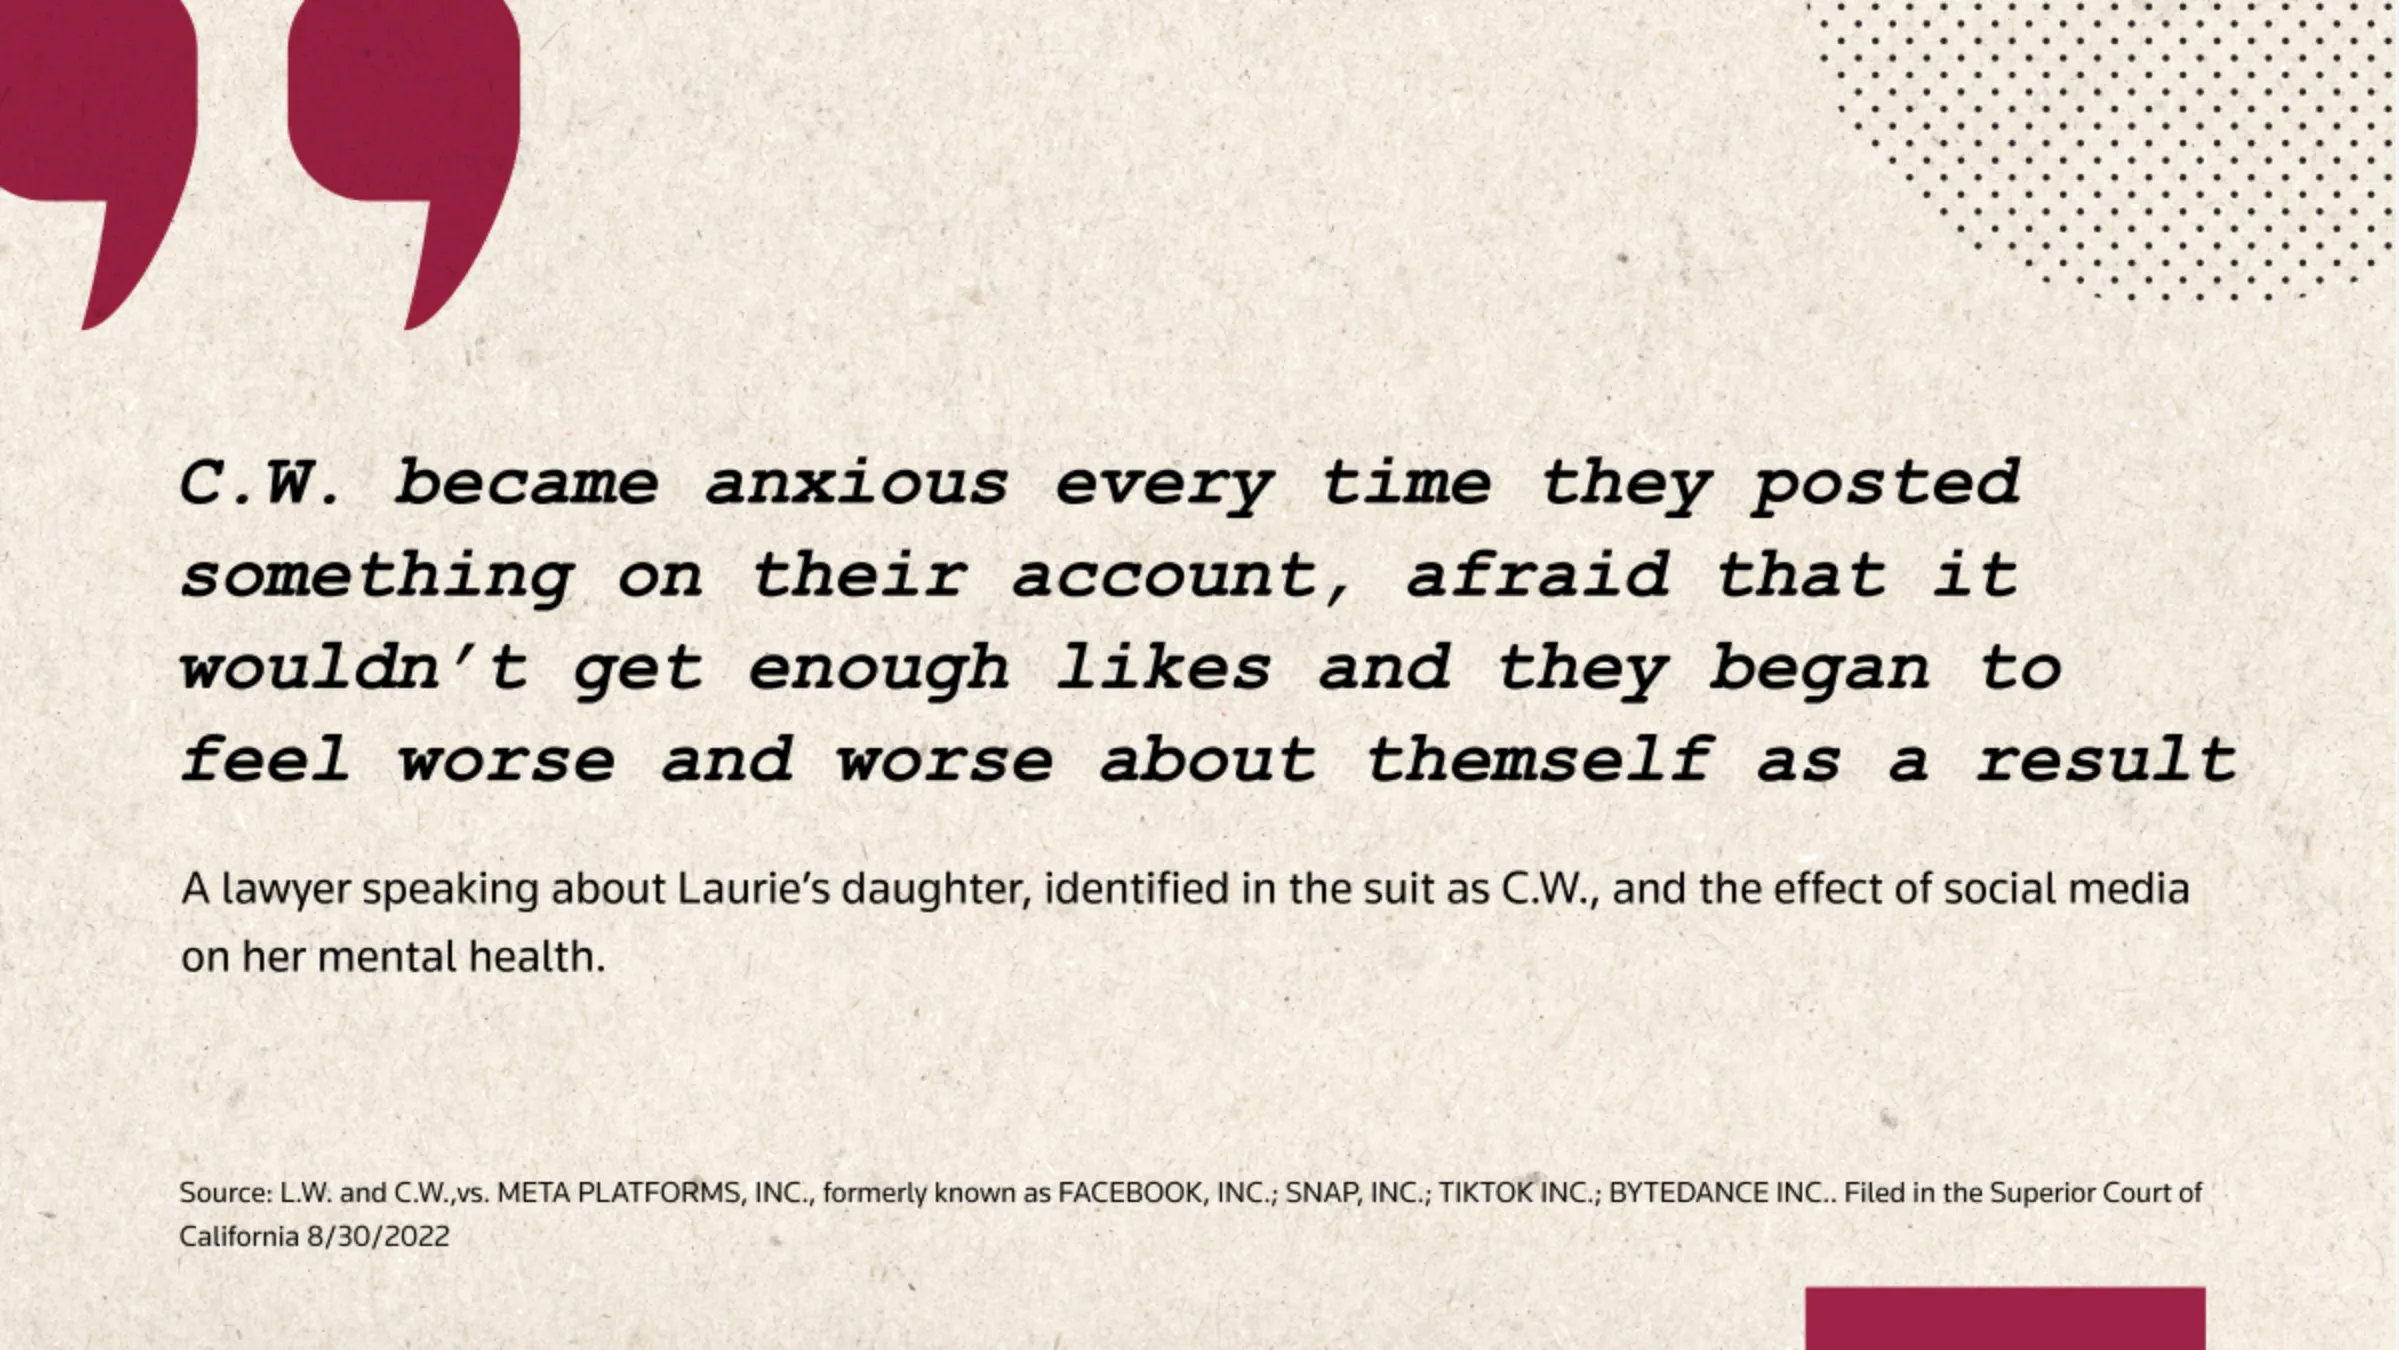 A quote card reads: 'C.W. became anxious every time they posted something on their account, afraid that it wouldn't get enough likes and they began to feel worse and worse about themself as a result'
- A lawyer speaking about Laurie's daughter, identified in the suit as C.W., and the effect of social media on her mental health. 
Source: L.W. and C.W.,vs. META PLATFORMS, INC., formerly known as FACEBOOK, INC.; SNAP, INC.; TIKTOK INC.; BYTEDANCE INC.. Filed in the Superior Court of California 8/30/2022